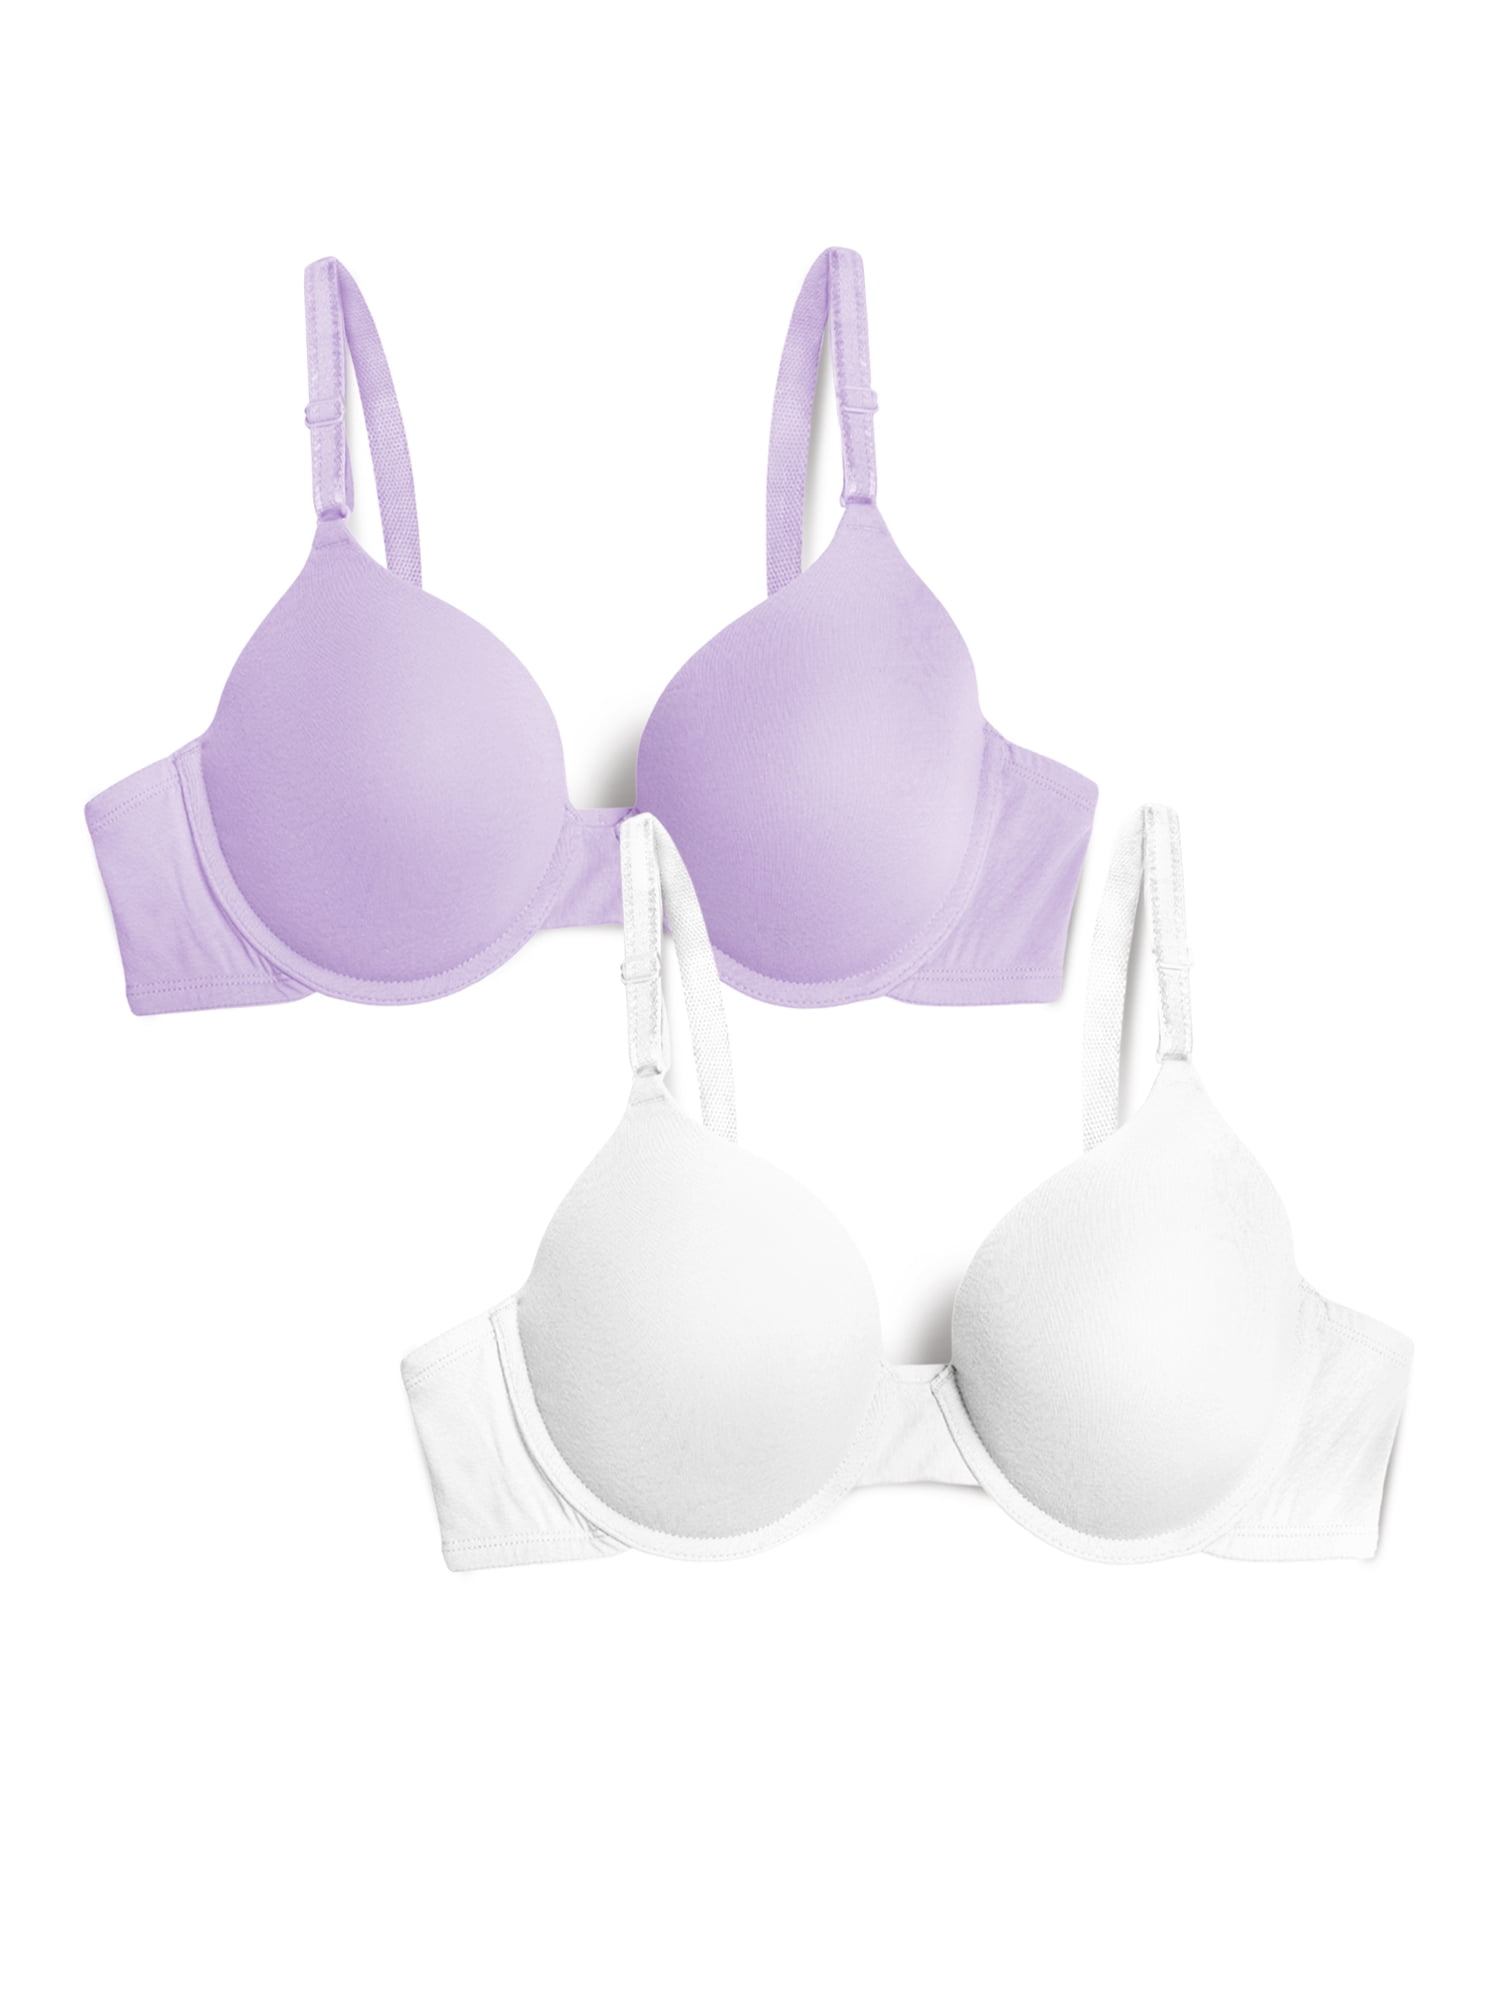 Fruit of the Loom T-Shirt Bra 2 Pack, Style FT938, Sizes M to XXL